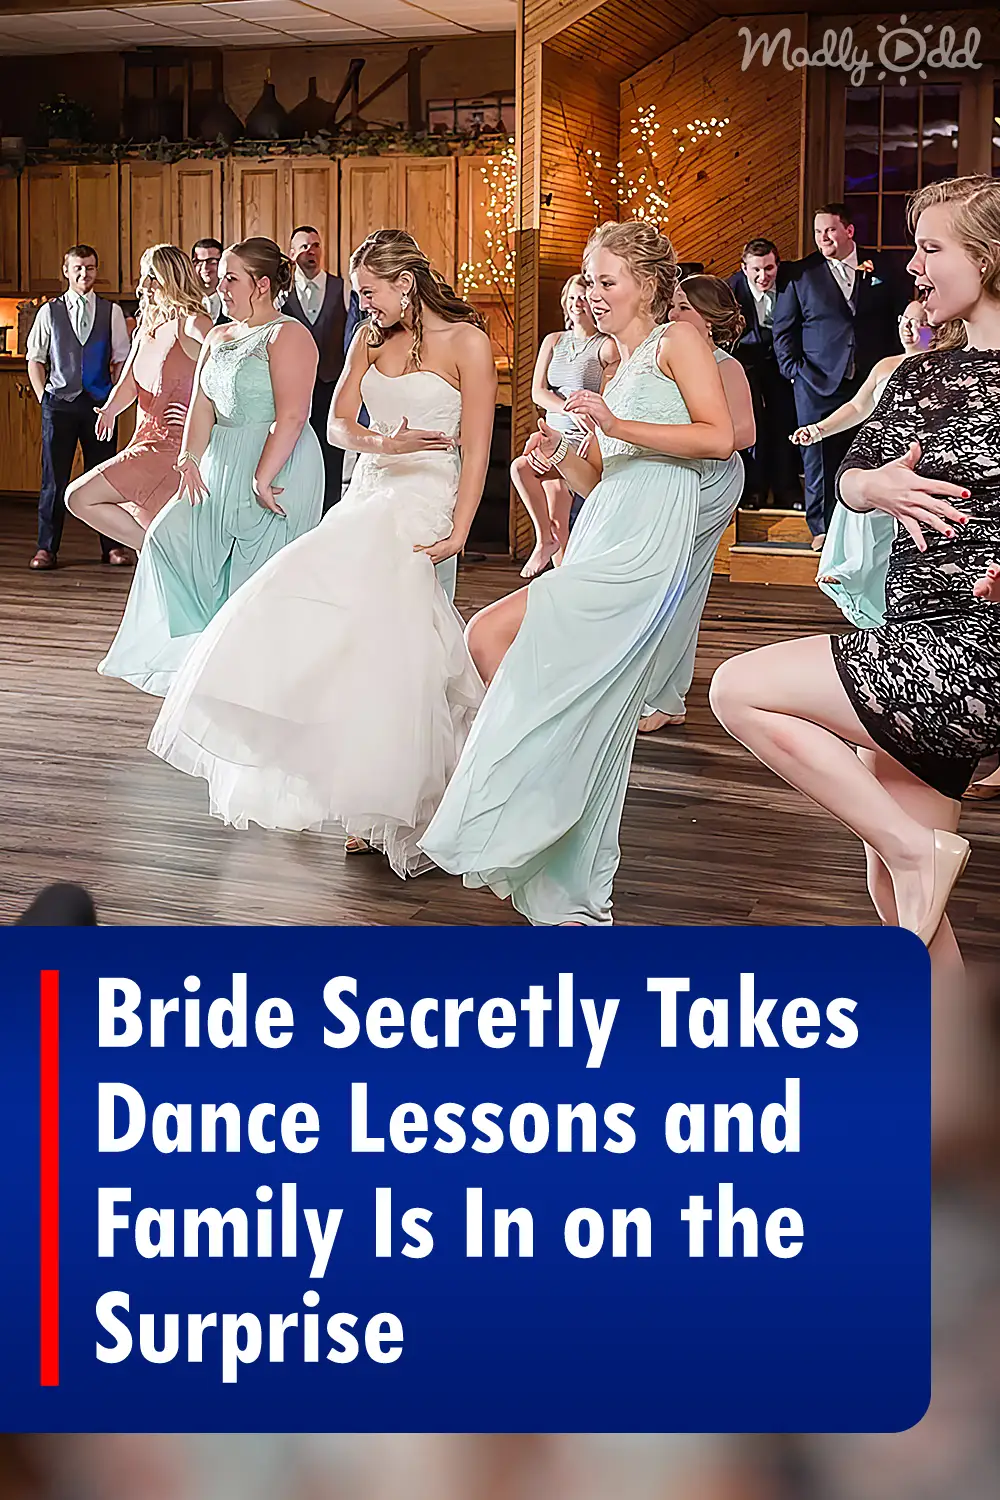 Bride Secretly Takes Dance Lessons and Family Is In on the Surprise